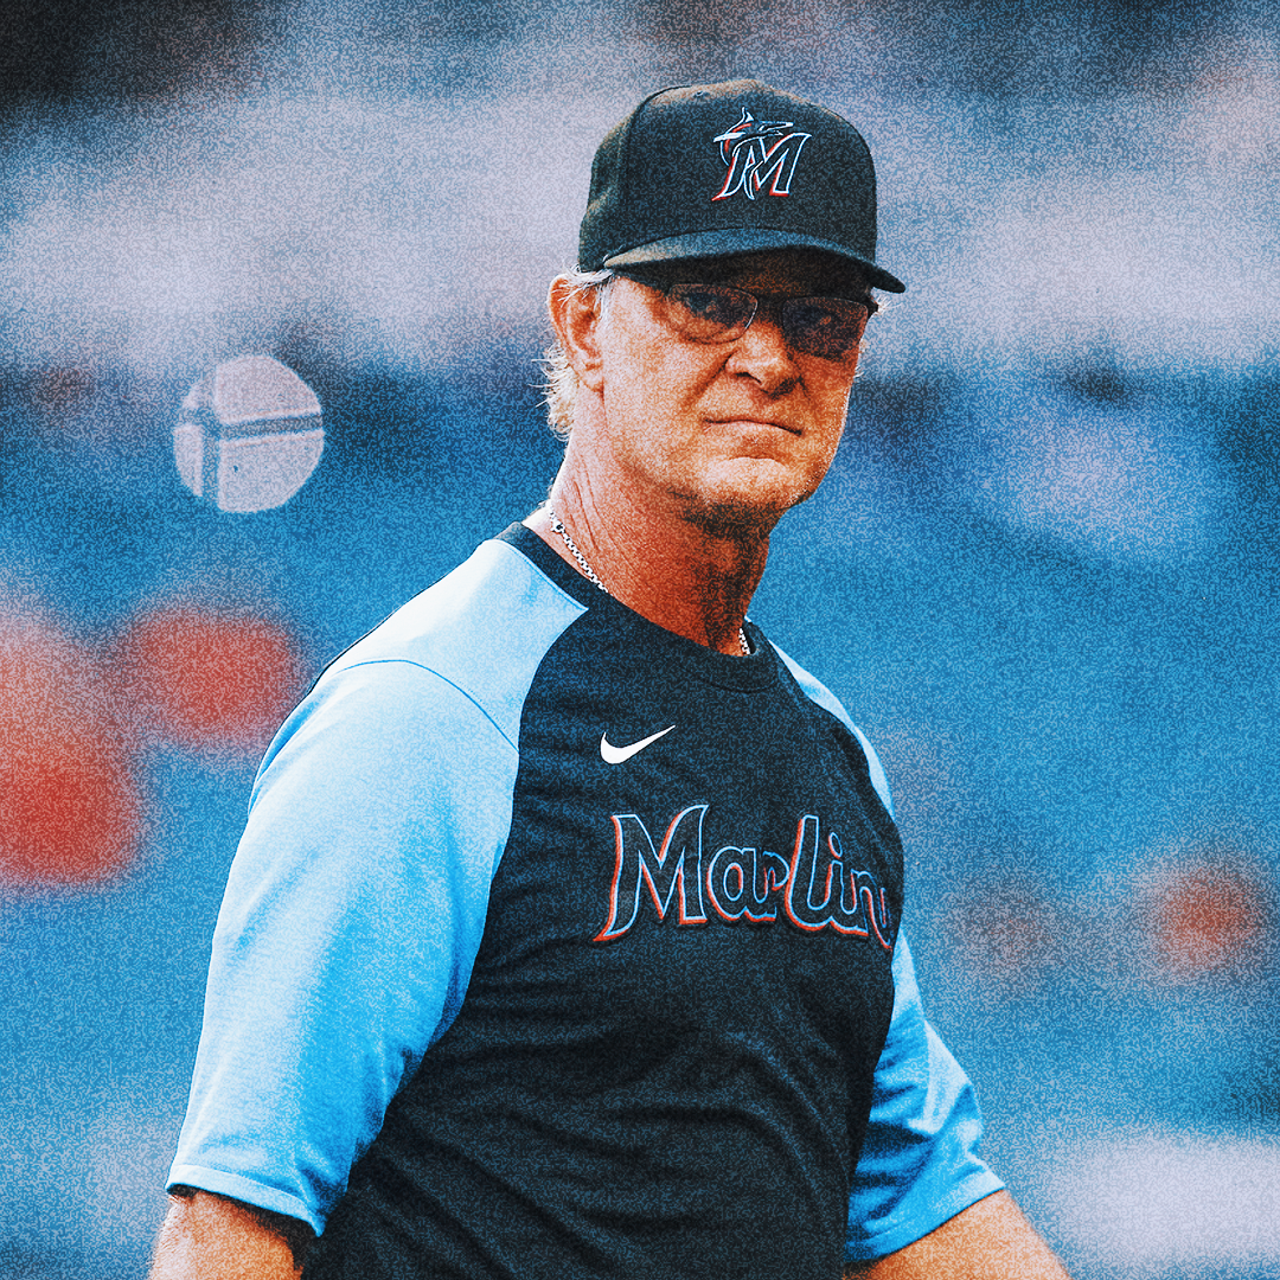 Mattingly, Jeter together again, but in different roles with Marlins